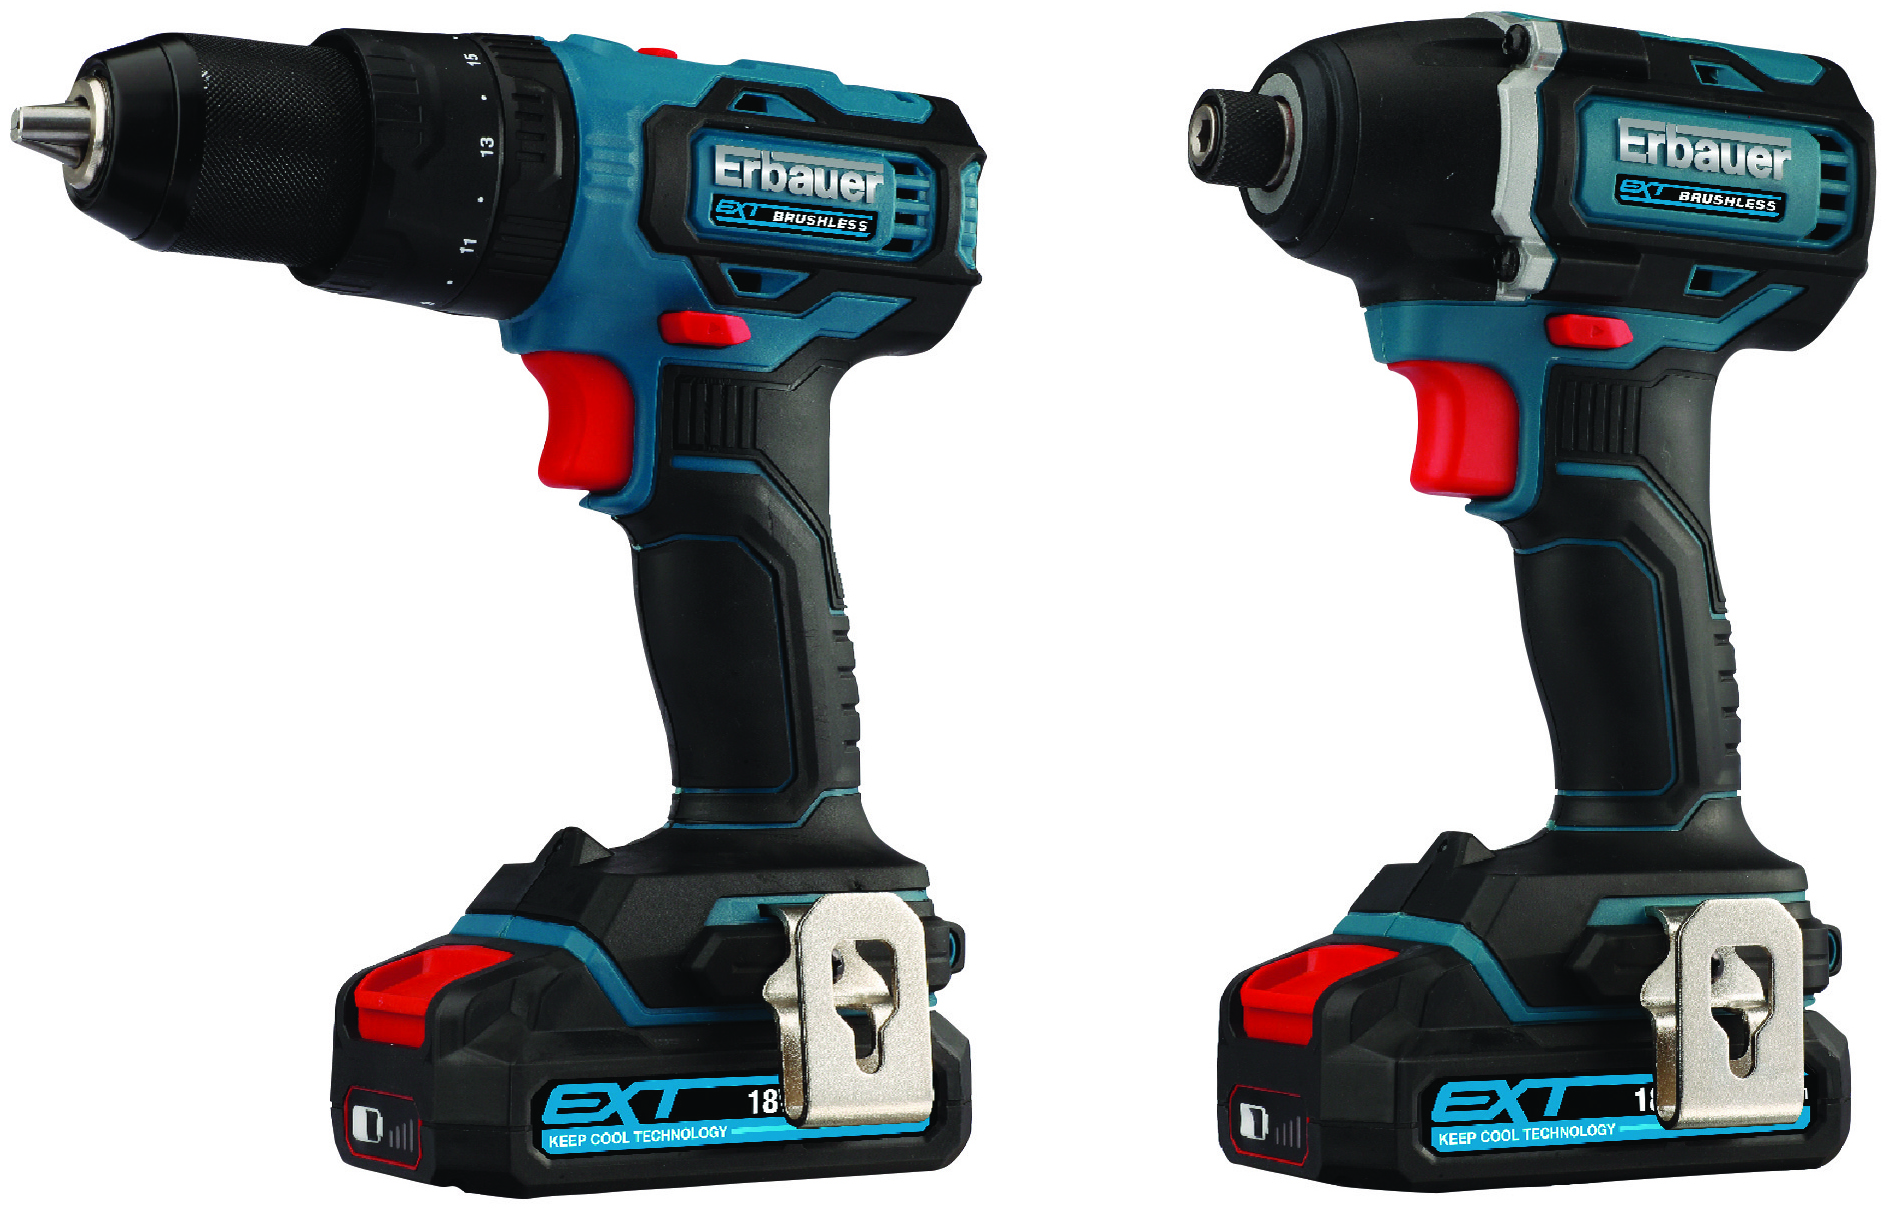 Screwfix boosts Erbauer power tools range – wider choice and greater value for tradespeople